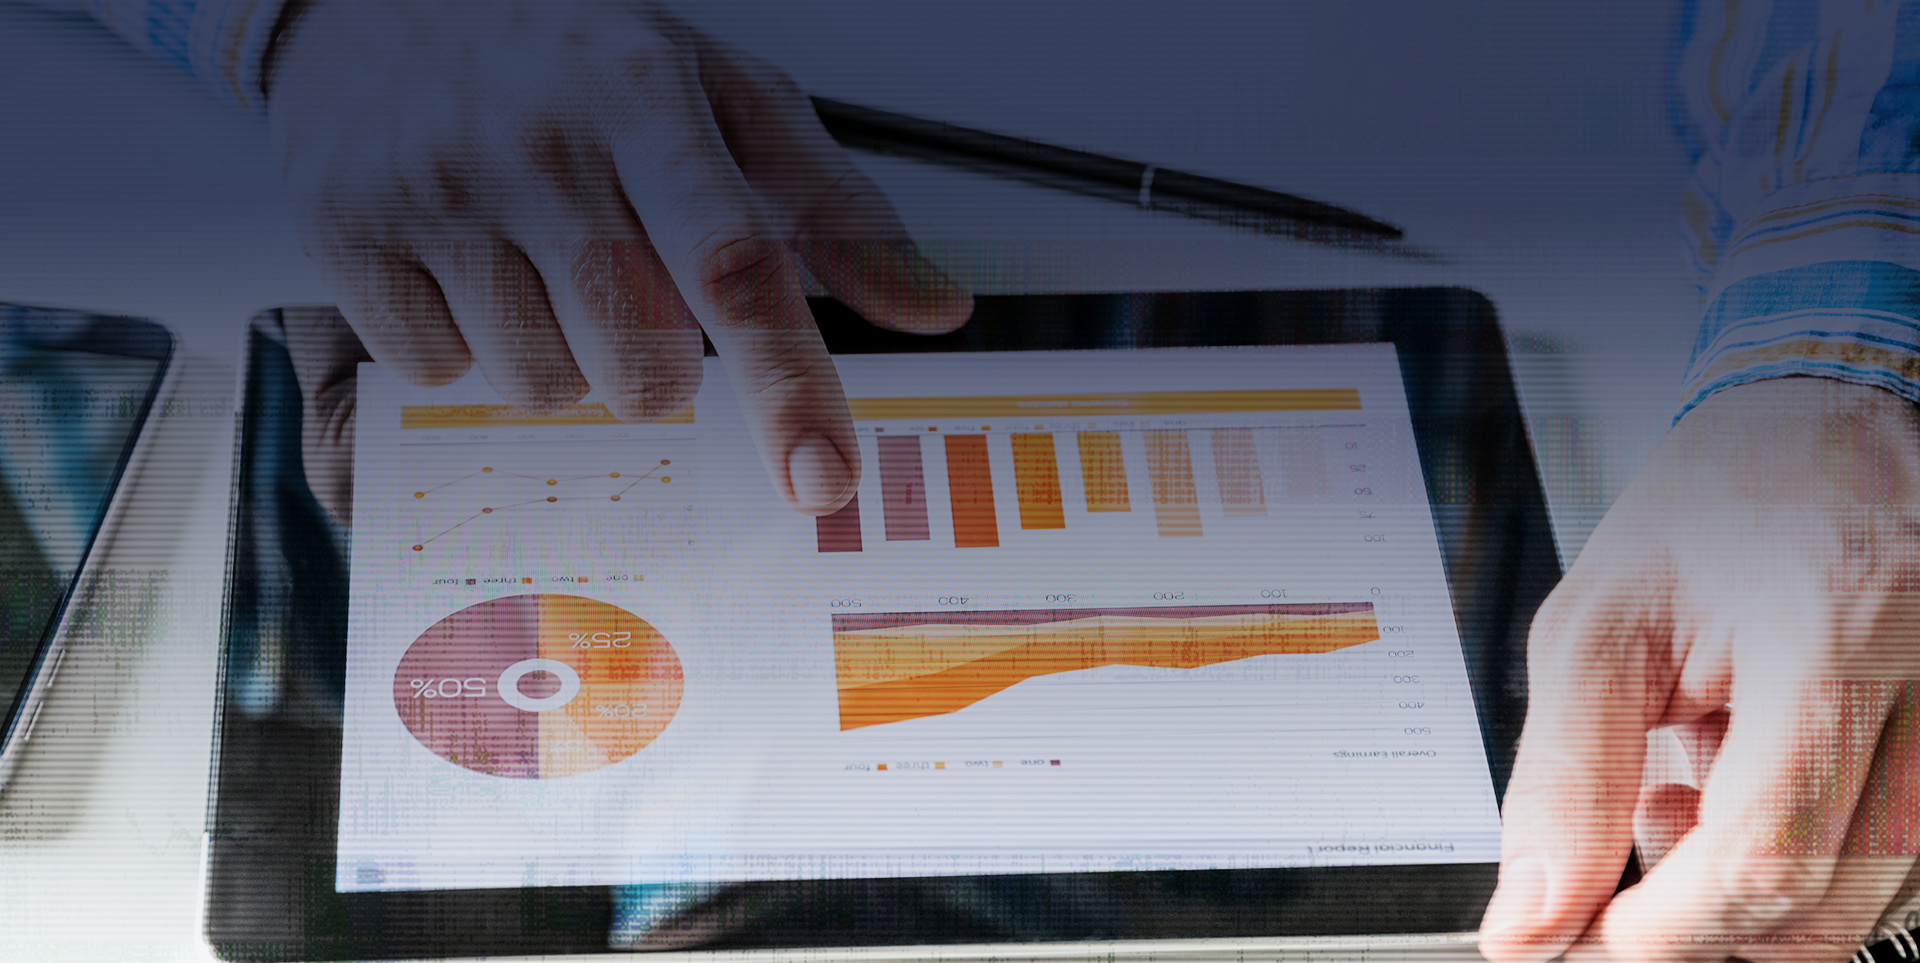 New Product Development Research Case Study Header - Ipad with charts